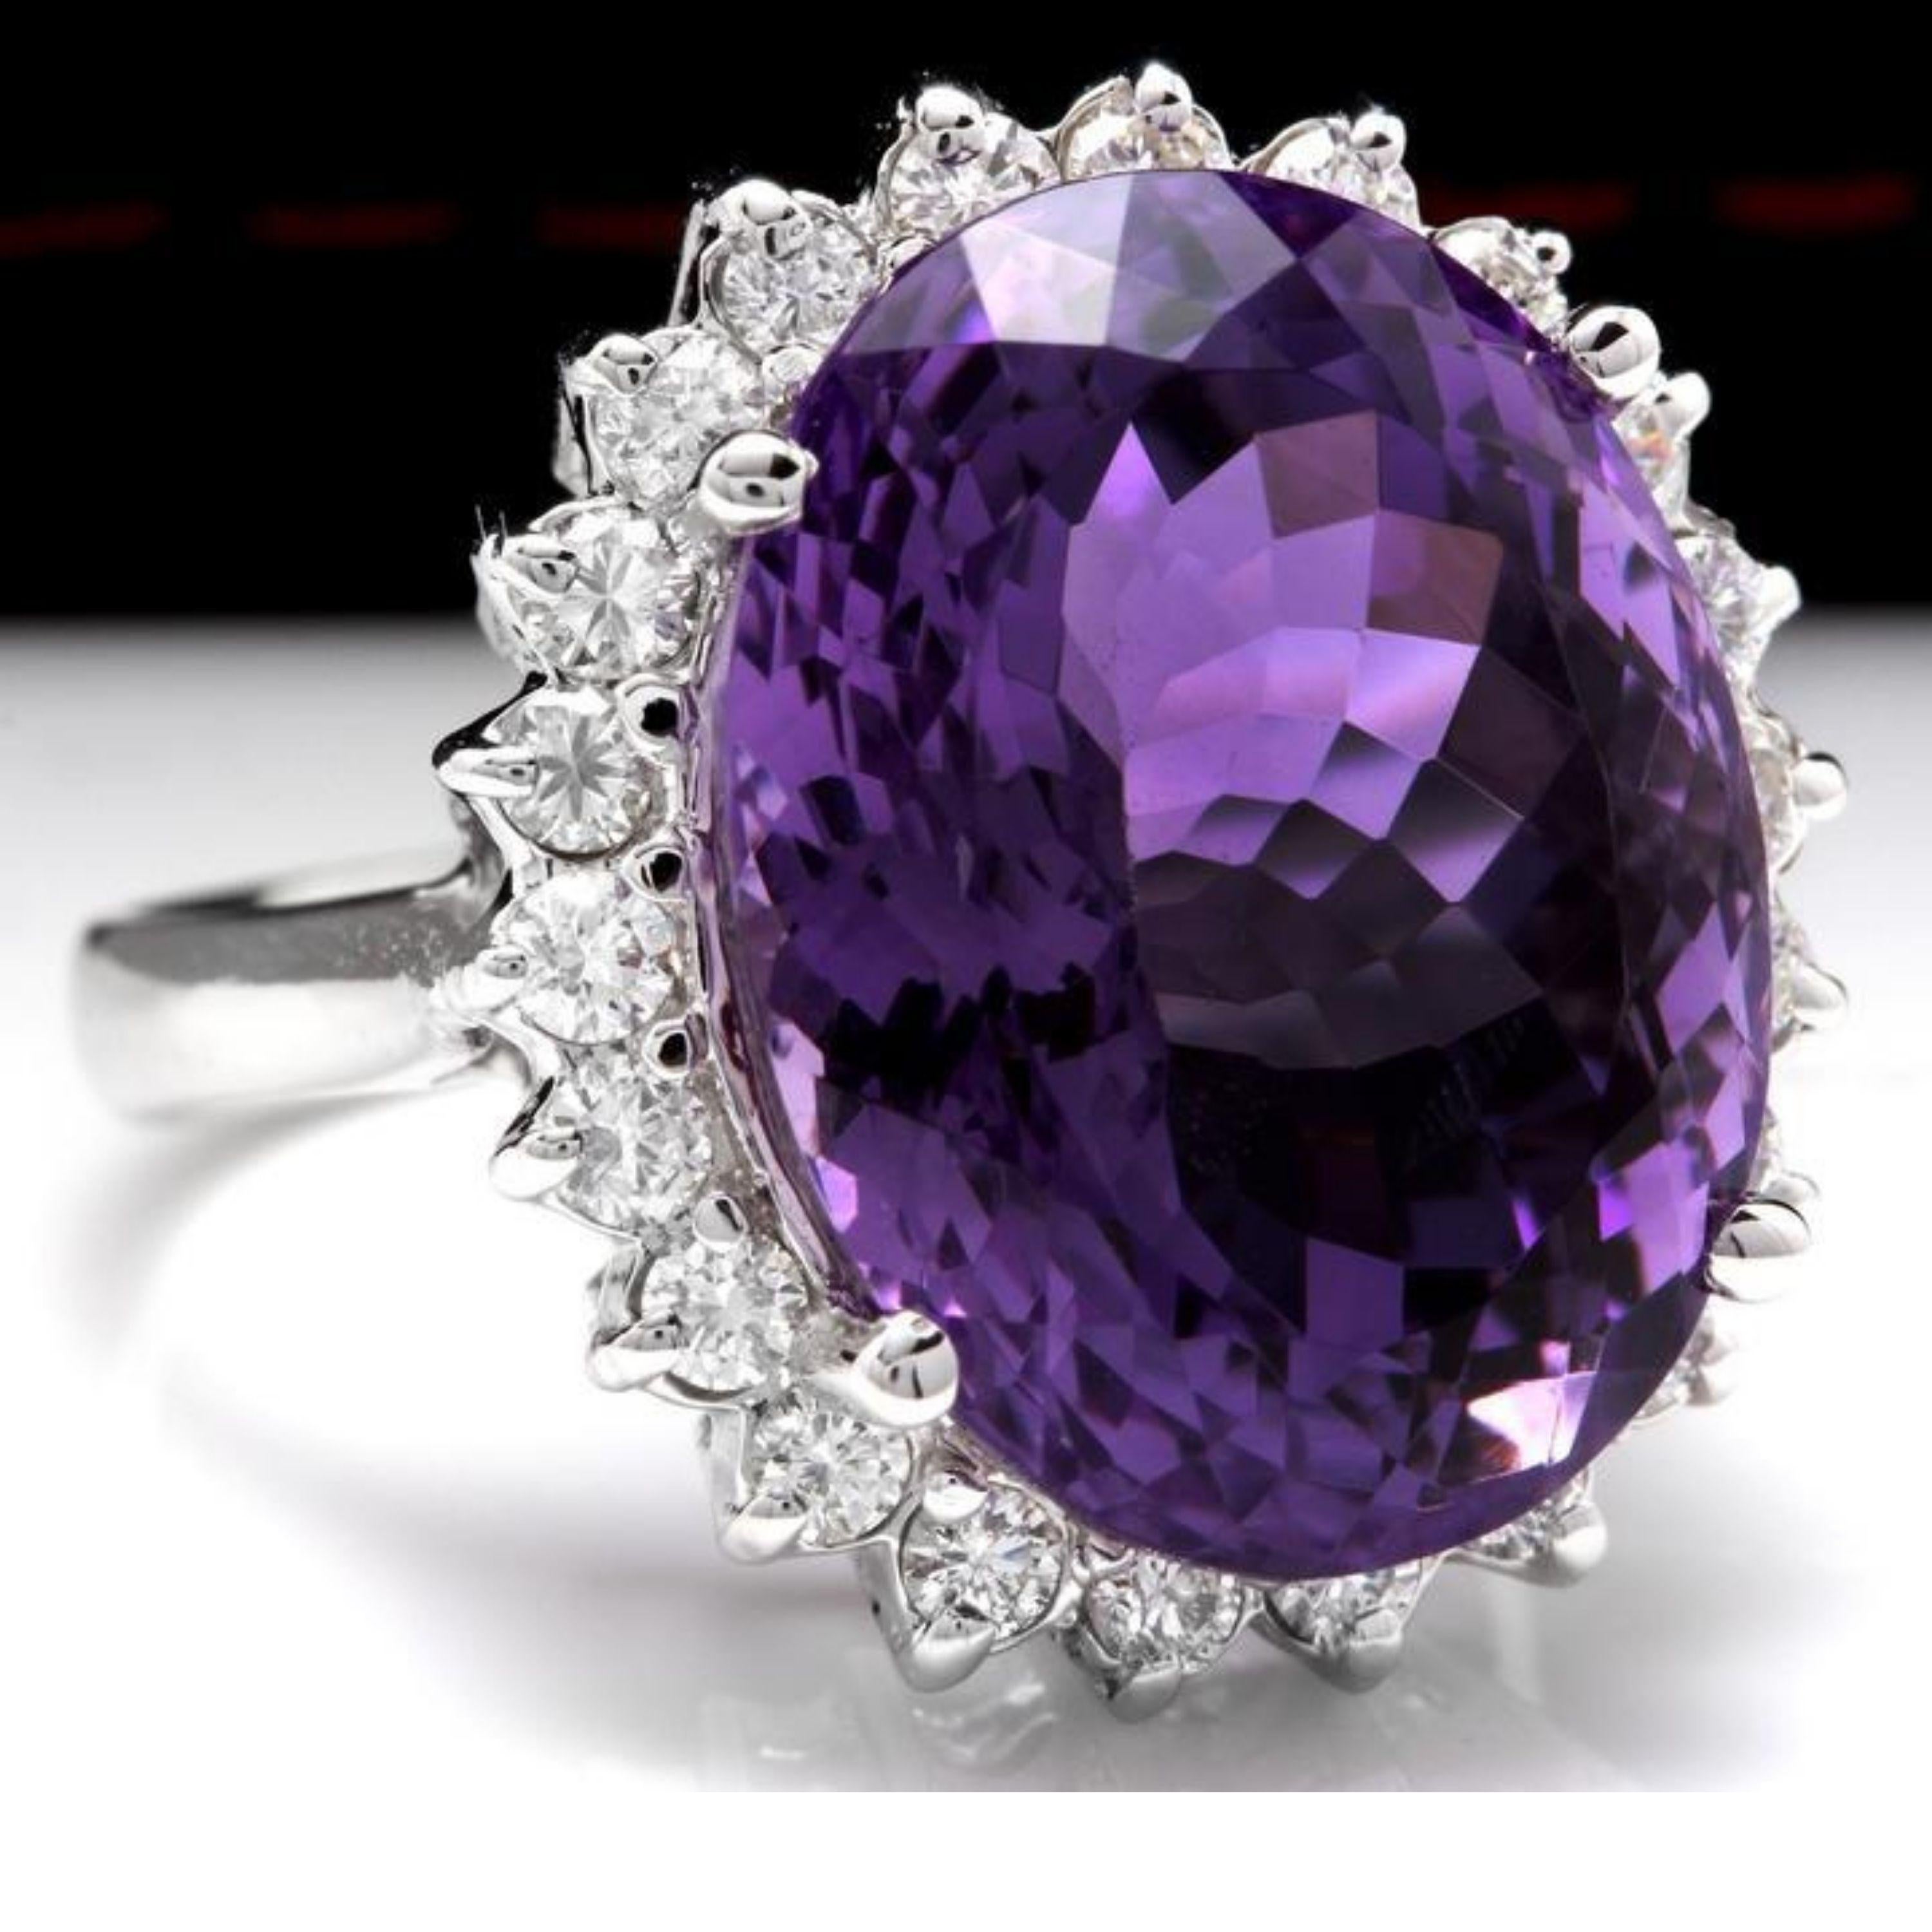 15.00 Carats Natural Amethyst and Diamond 14K Solid White Gold Ring

Total Natural Oval Shaped Amethyst Weights: Approx. 14.00 Carats

Amethyst Measures: 16 x 12mm

Natural Round Diamonds Weight: Approx. 1.00 Carats (color G-H / Clarity